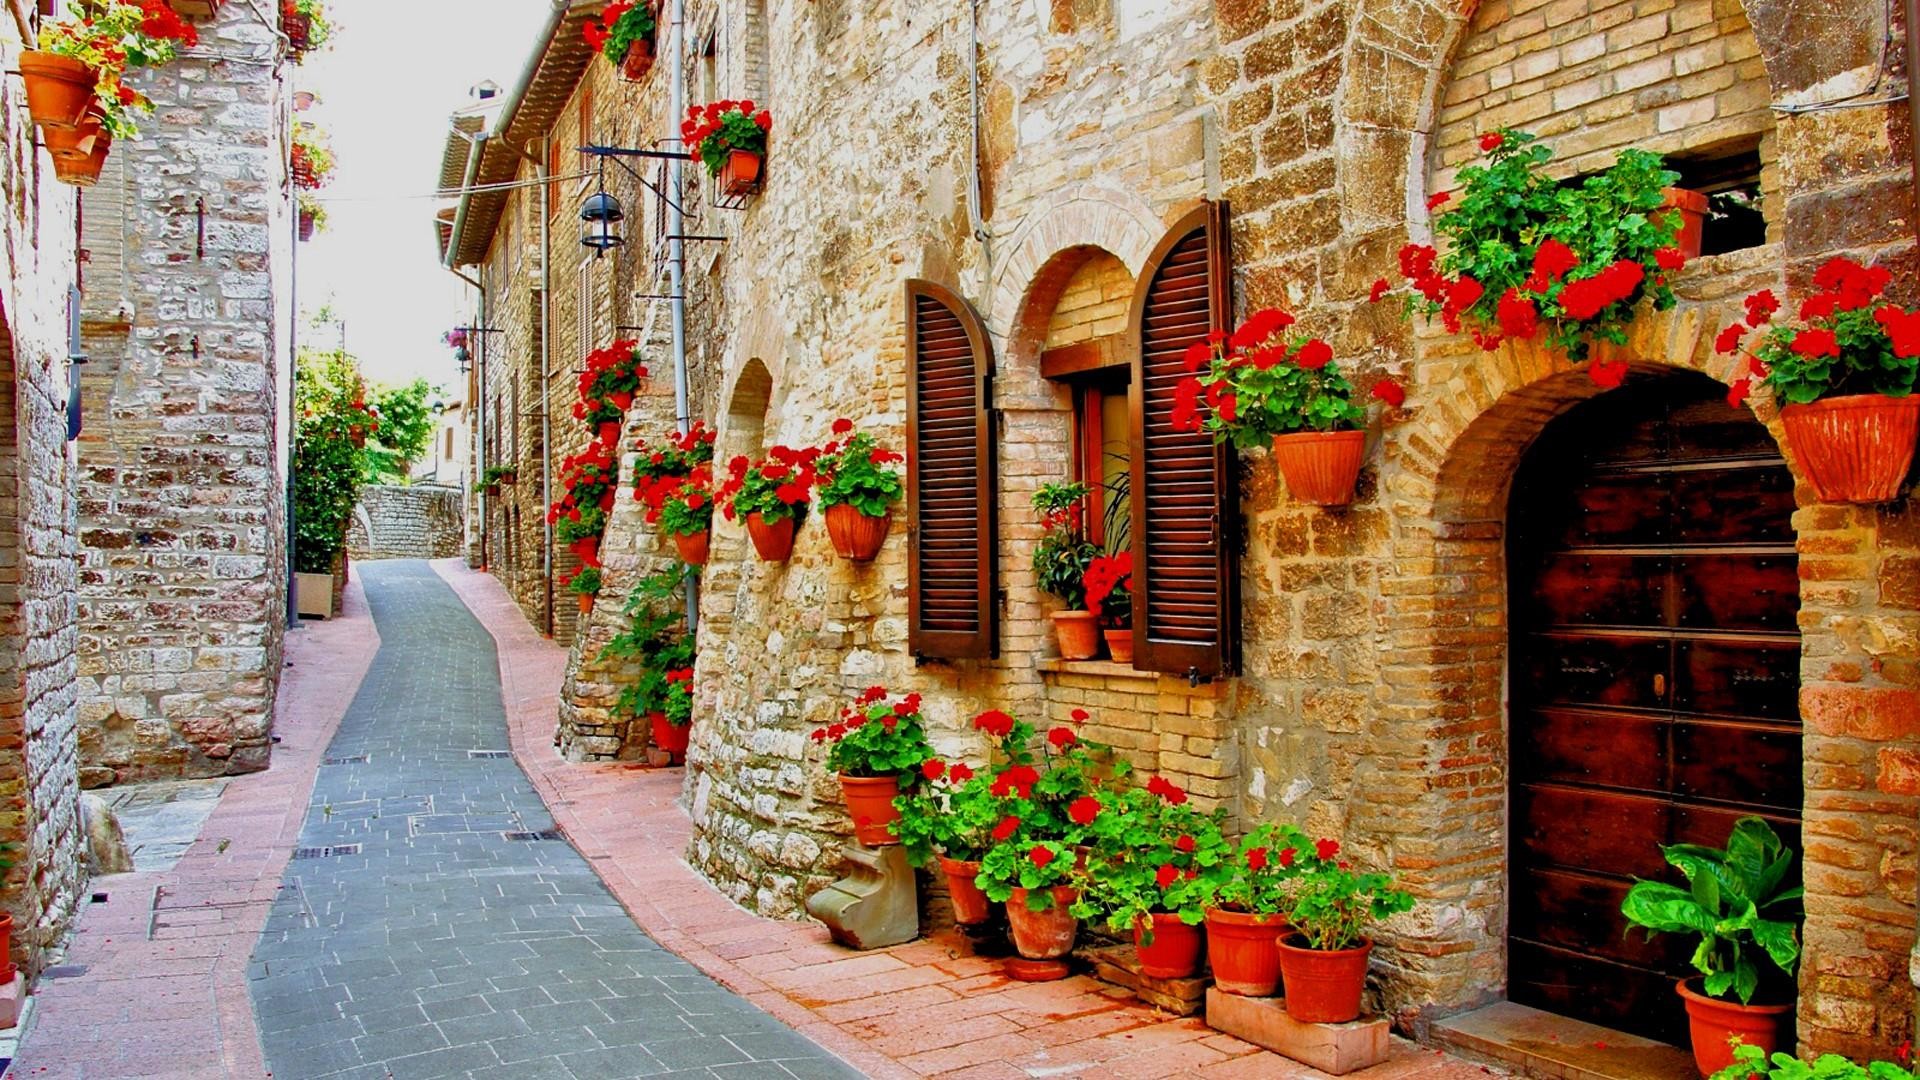 Flower Lined Street In The Town Of Assisi, Italy Wallpaper - Italy Wallpaper Hd , HD Wallpaper & Backgrounds